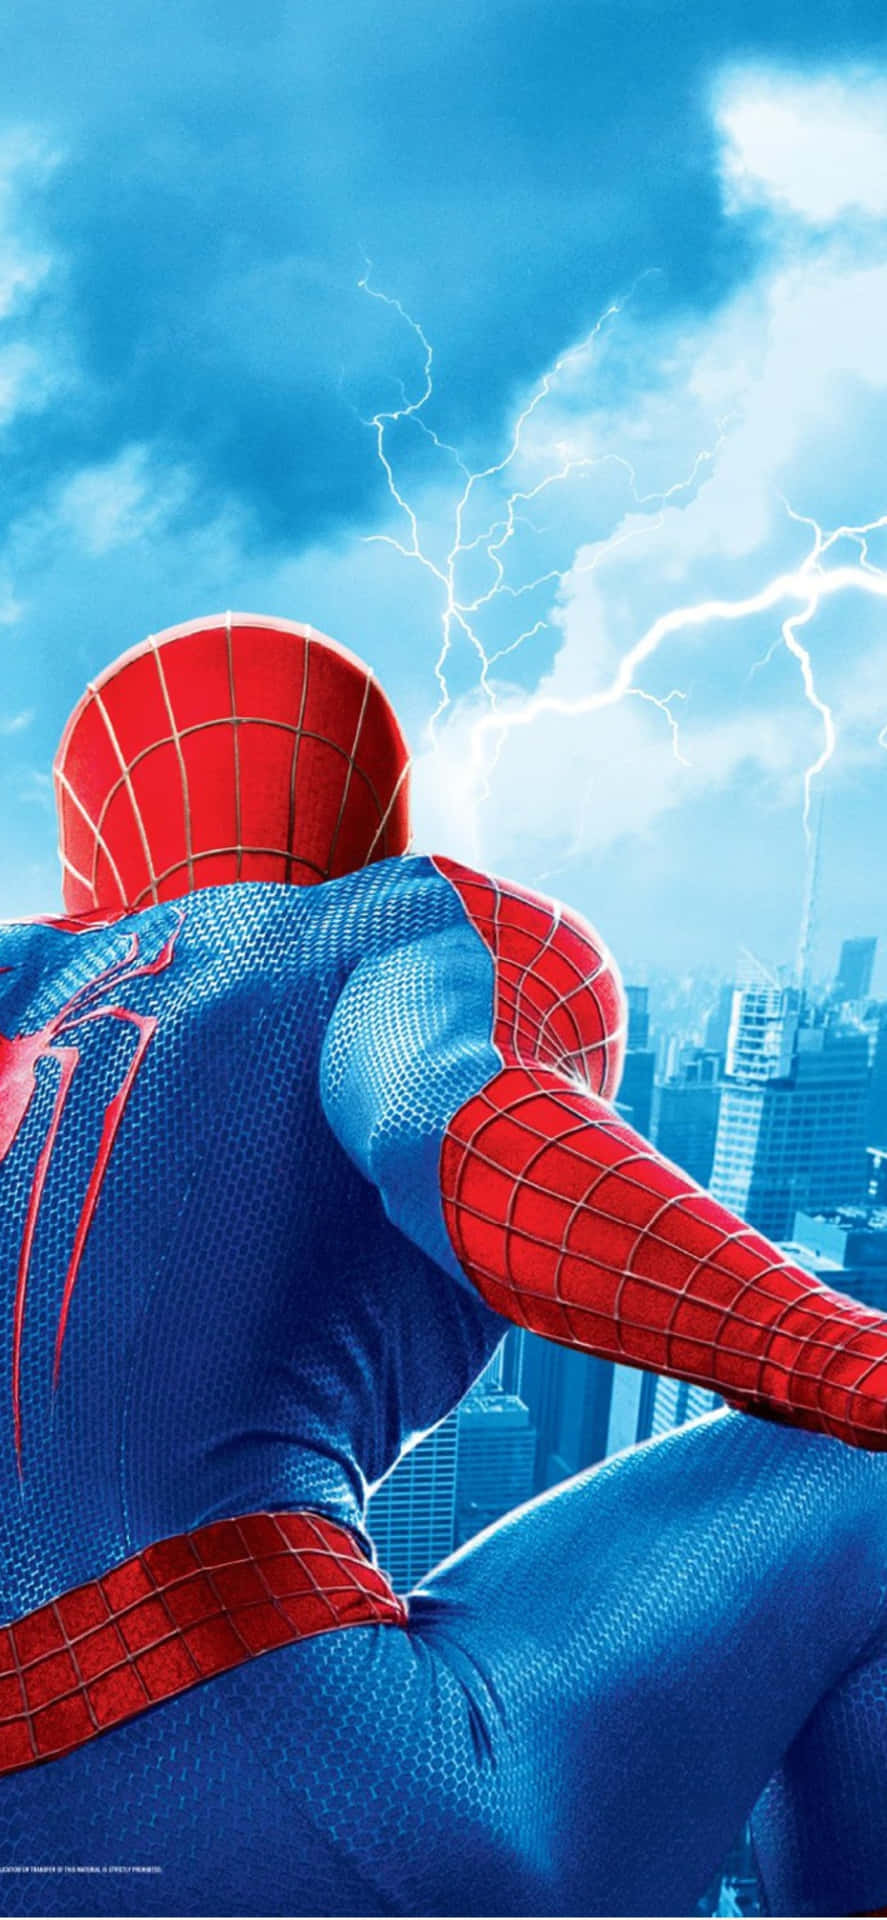 Enjoy the Amazing Adventure of Spider Man on Your iPhone Today! Wallpaper